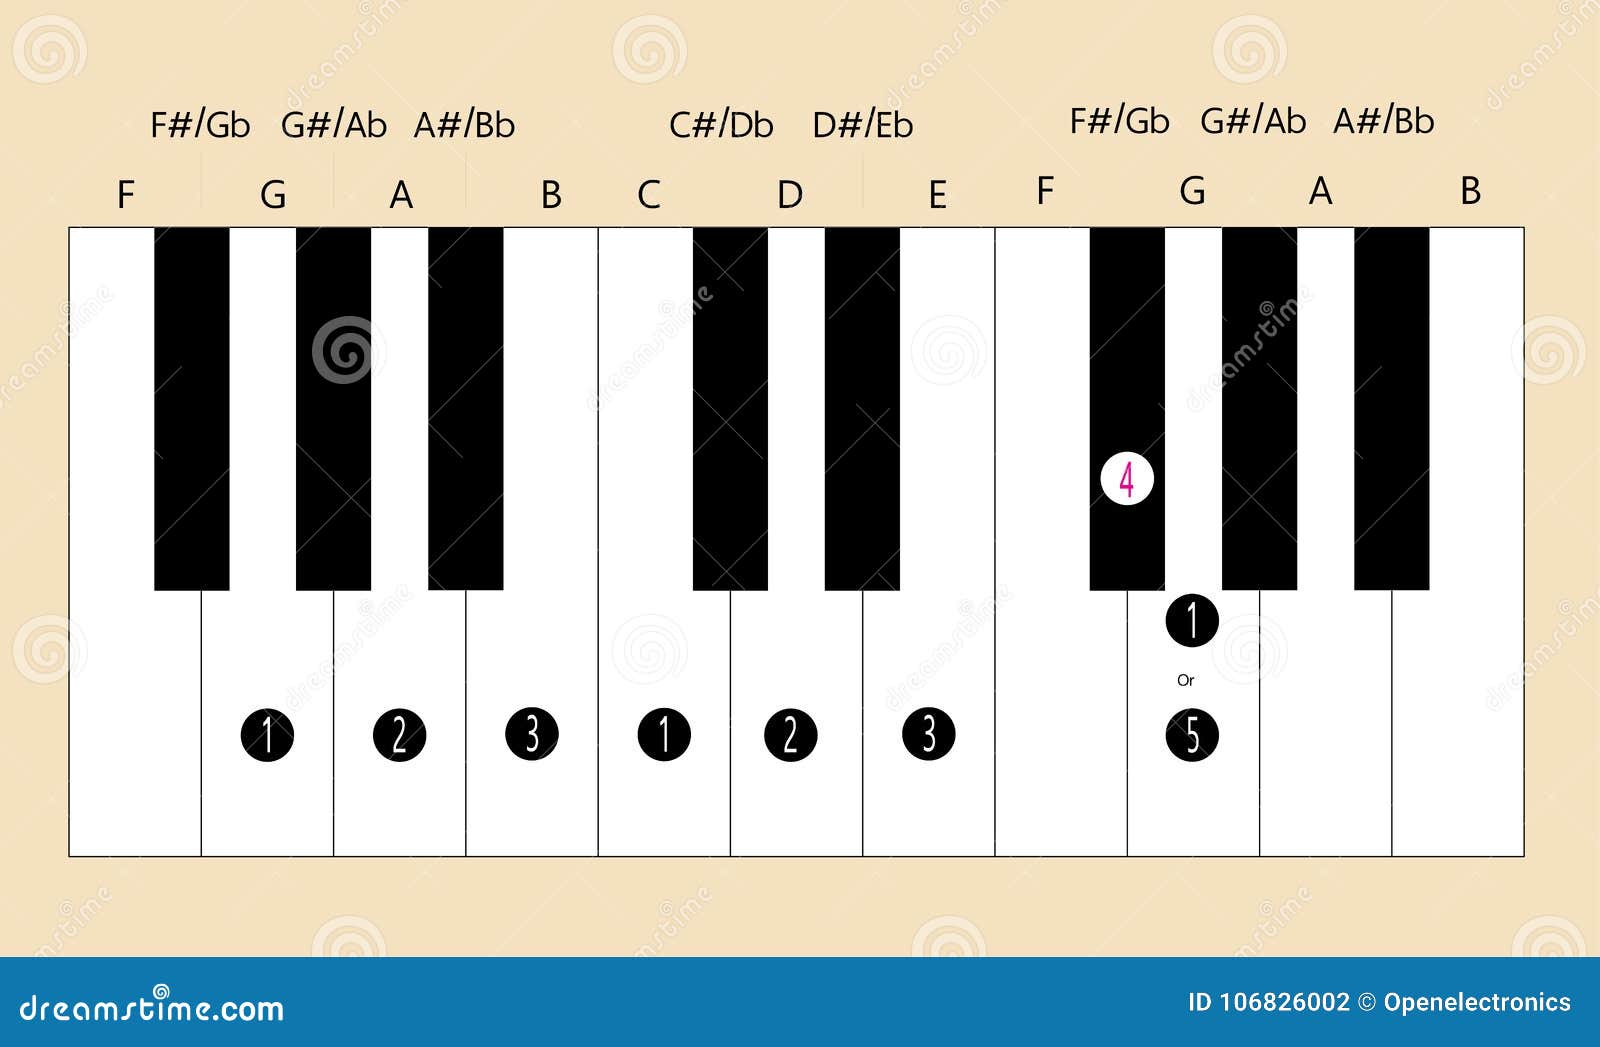 G Major Scale Fingering For Piano To Use With Every Application